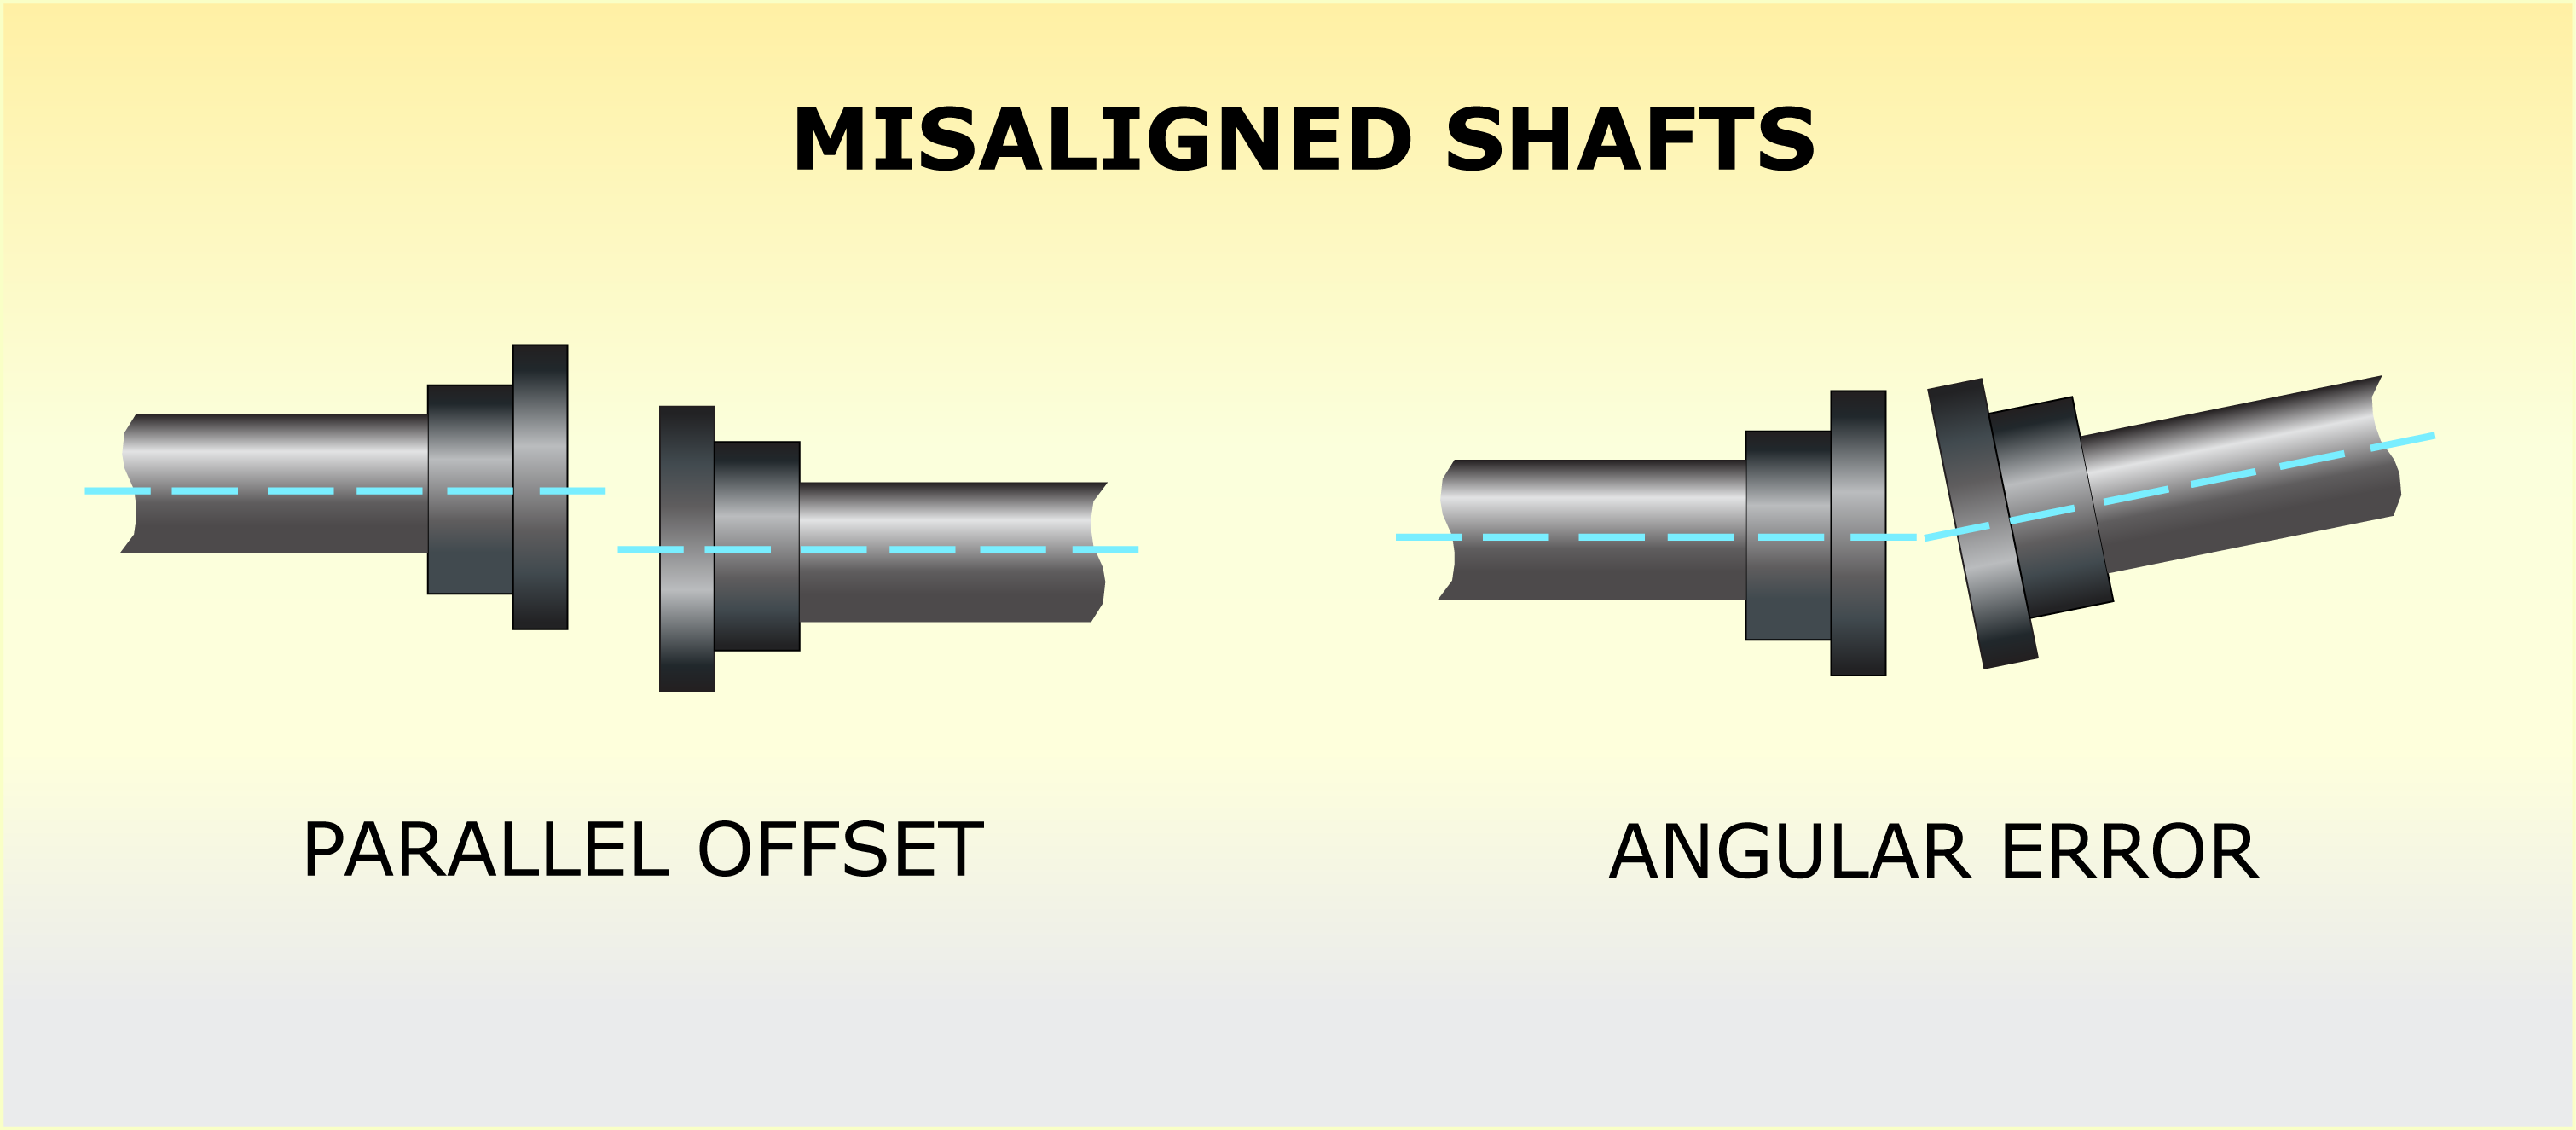 Image showing misaligned shafts- parallel offset on the left and angular error on the right